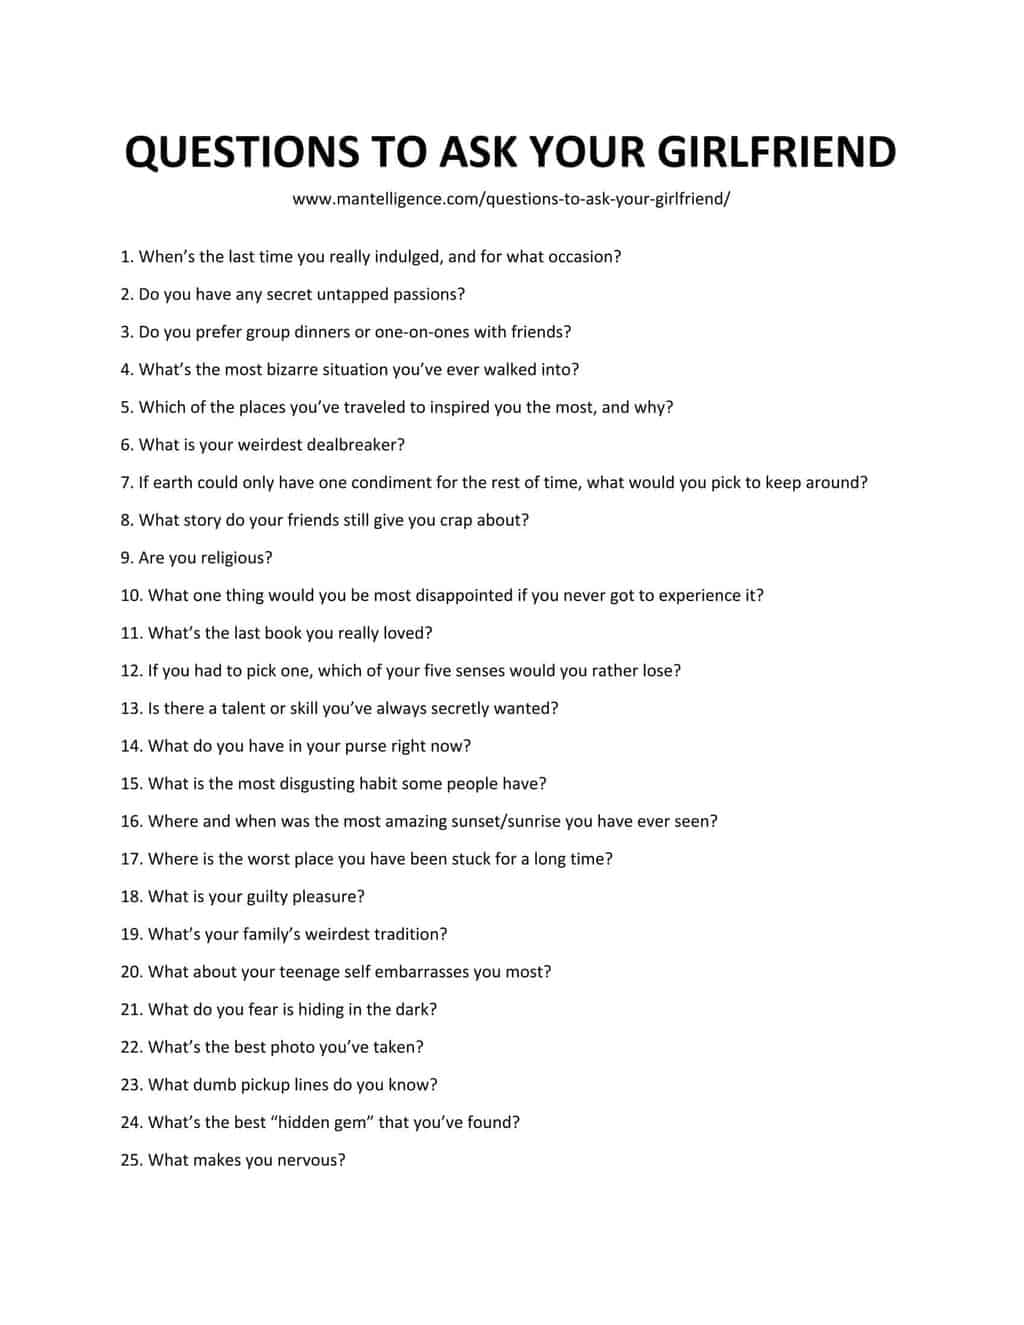 10 question to ask your gf